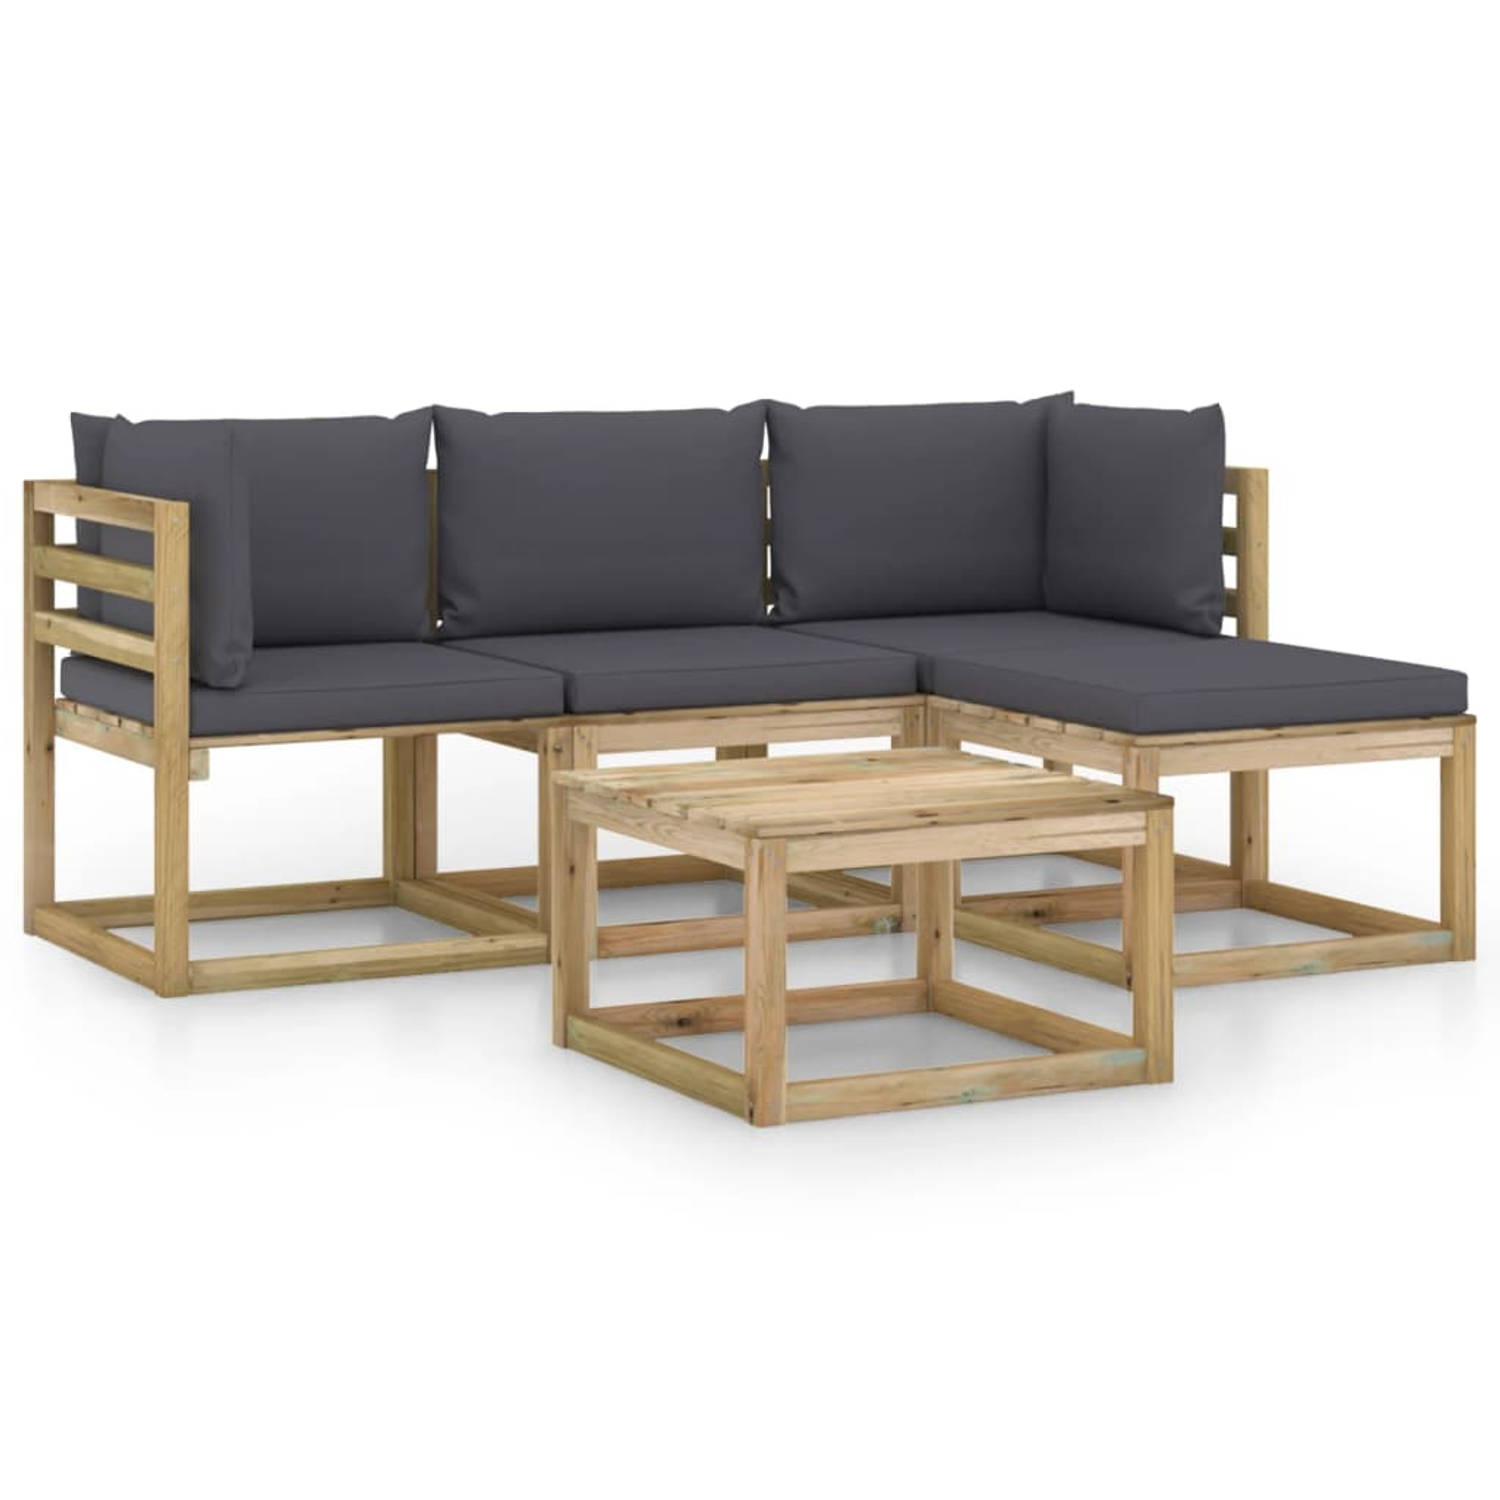 The Living Store Tuinset - Pallet hout - Grenenhout - 5-delig - Antraciet kussen - 120g/m²